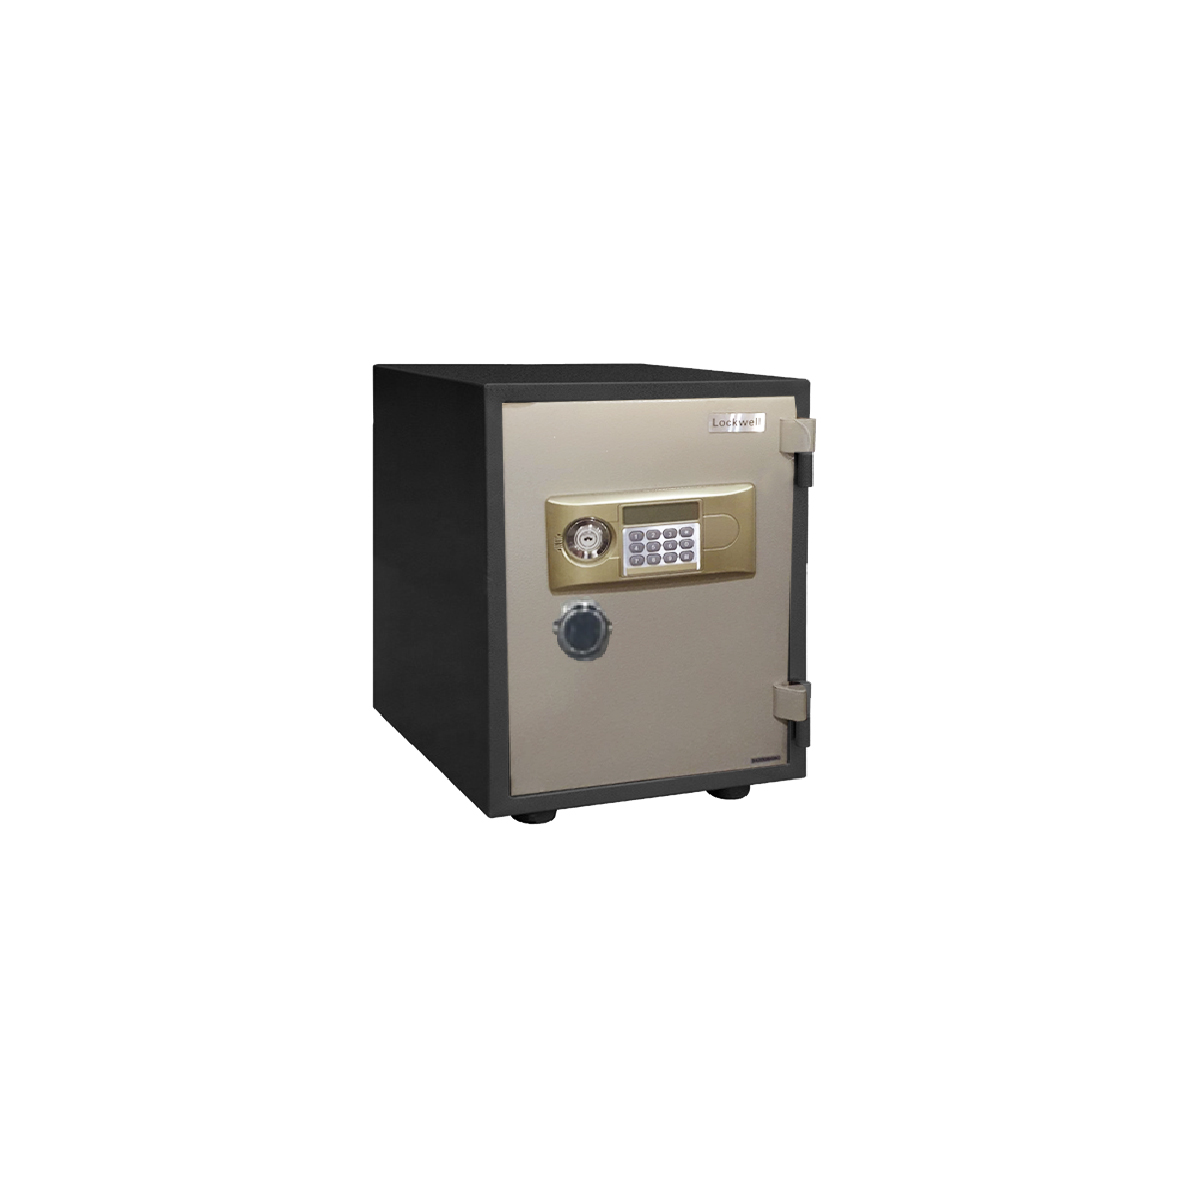 Lockwell ELectronic Fire Safe, YB530ALD